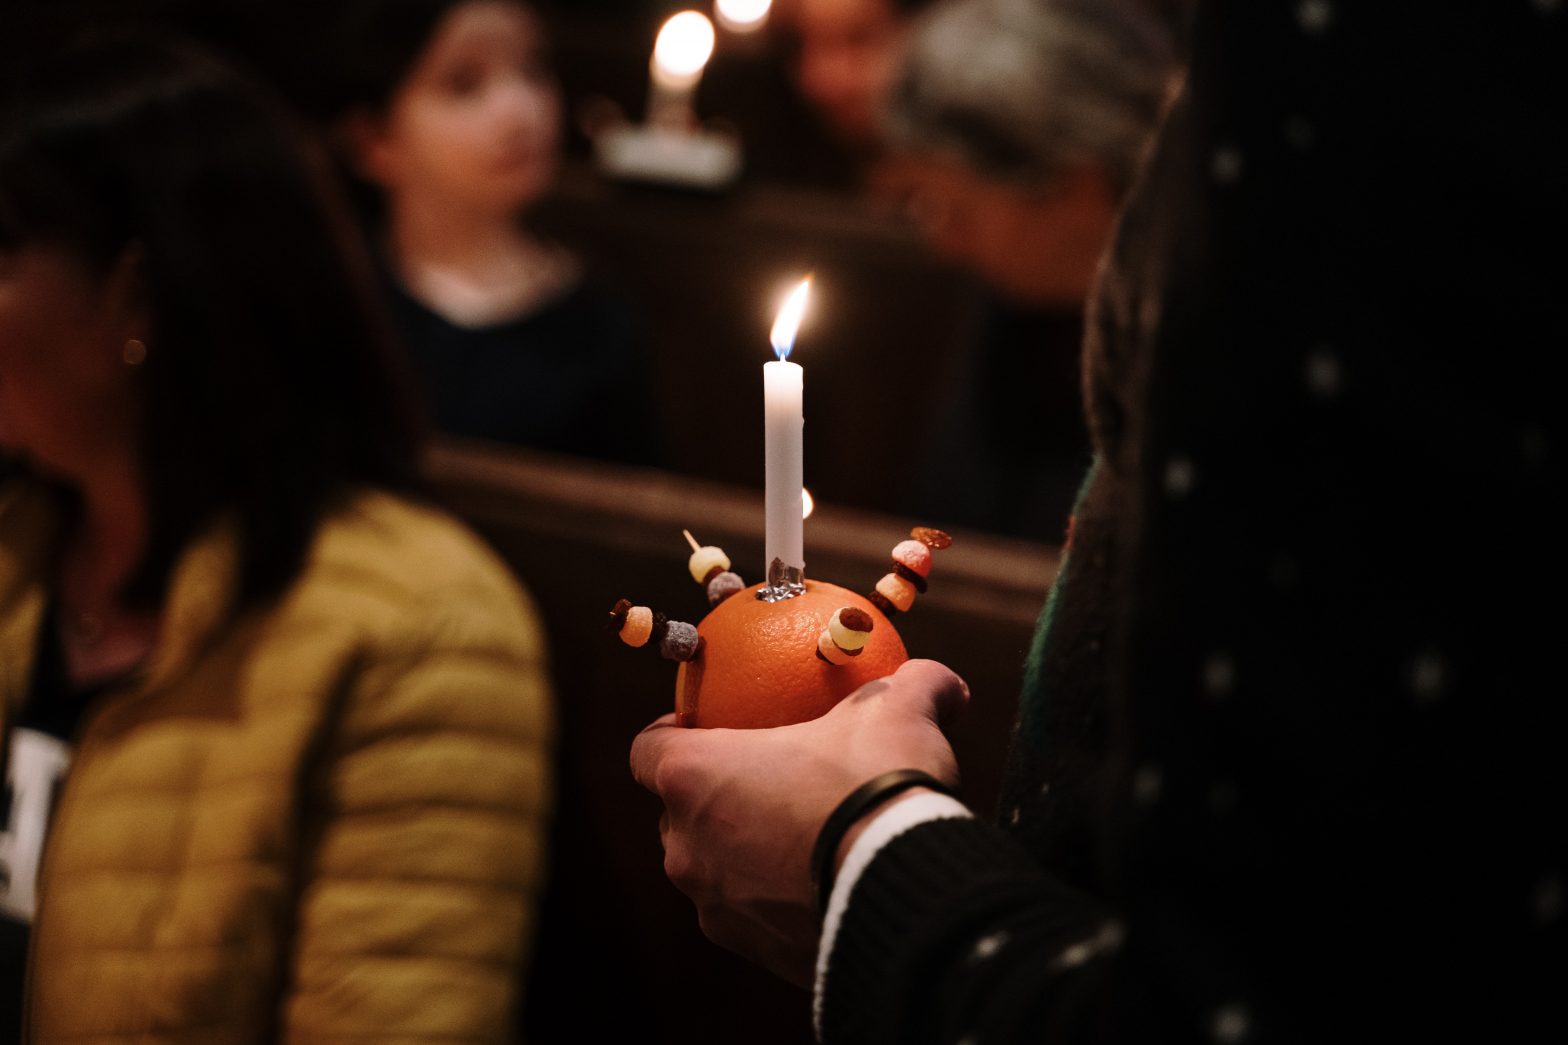 A hand holding a Christingle orange with a lit candle on top and sweets skewered around the candle